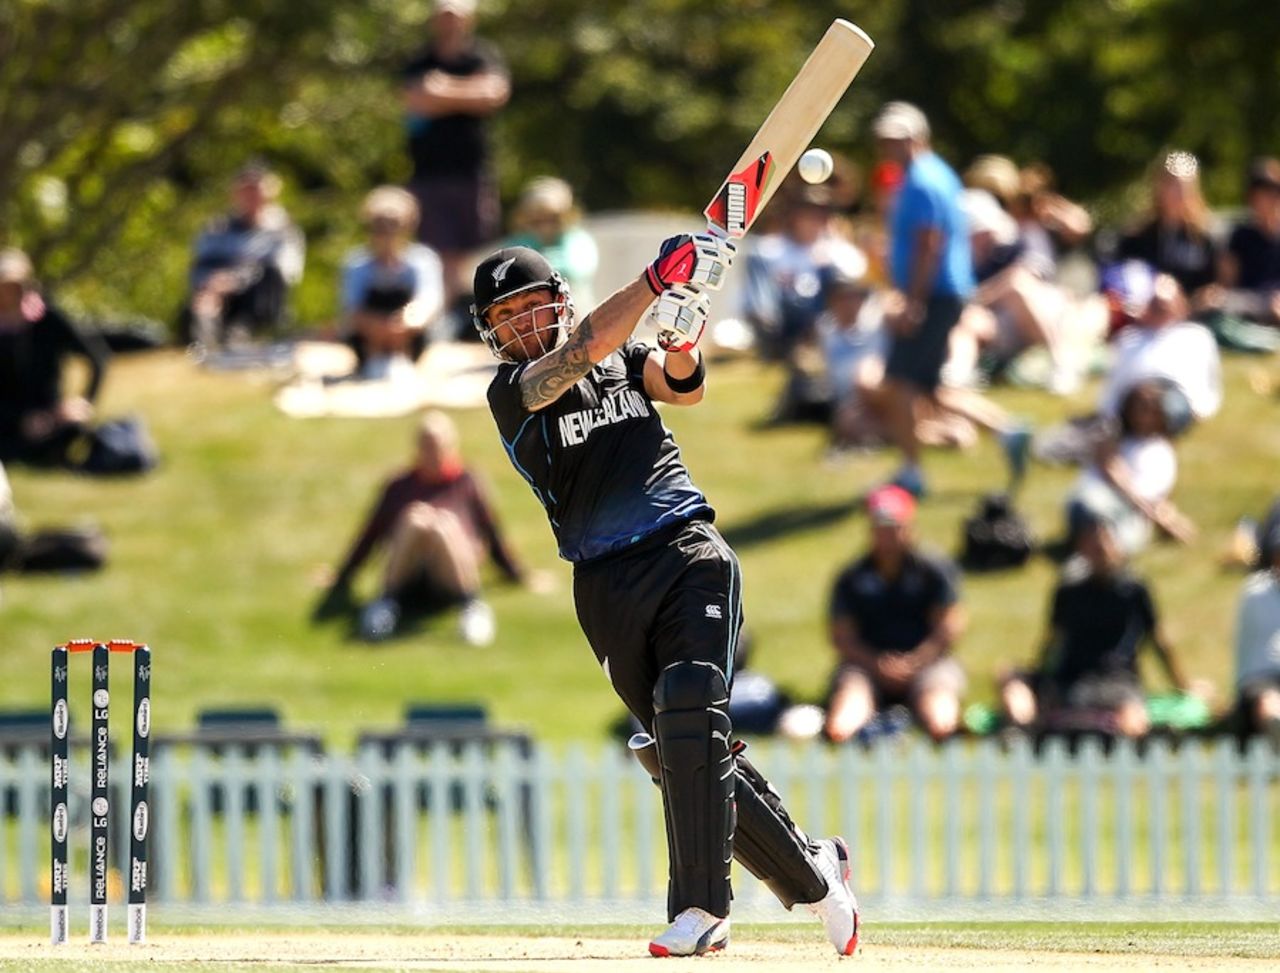 Brendon McCullum got to fifty at faster than a run a ball, New Zealand v South Africa, World Cup warm-up match, Christchurch, February 11, 2015